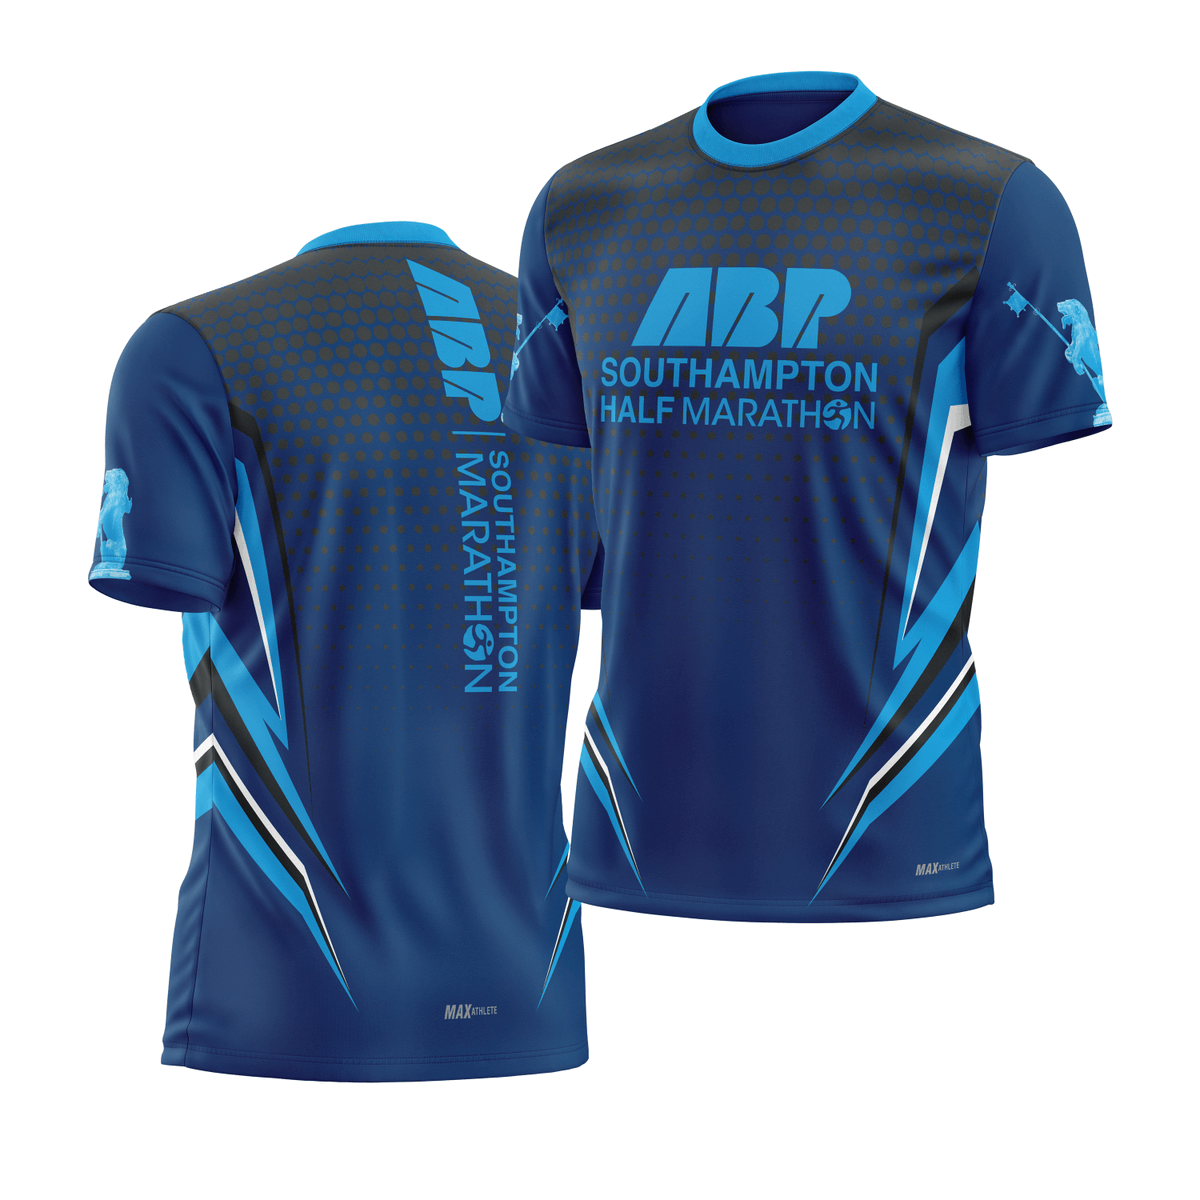 Prep your training this winter and get your hands on one of our ABP Southampton Training Tees👕 Only £10 a tee, and comes in 3 designs! They are fully technical sports material. 🏃 Find out more and order HERE: reesleisureonline.myshopify.com/collections/ab…